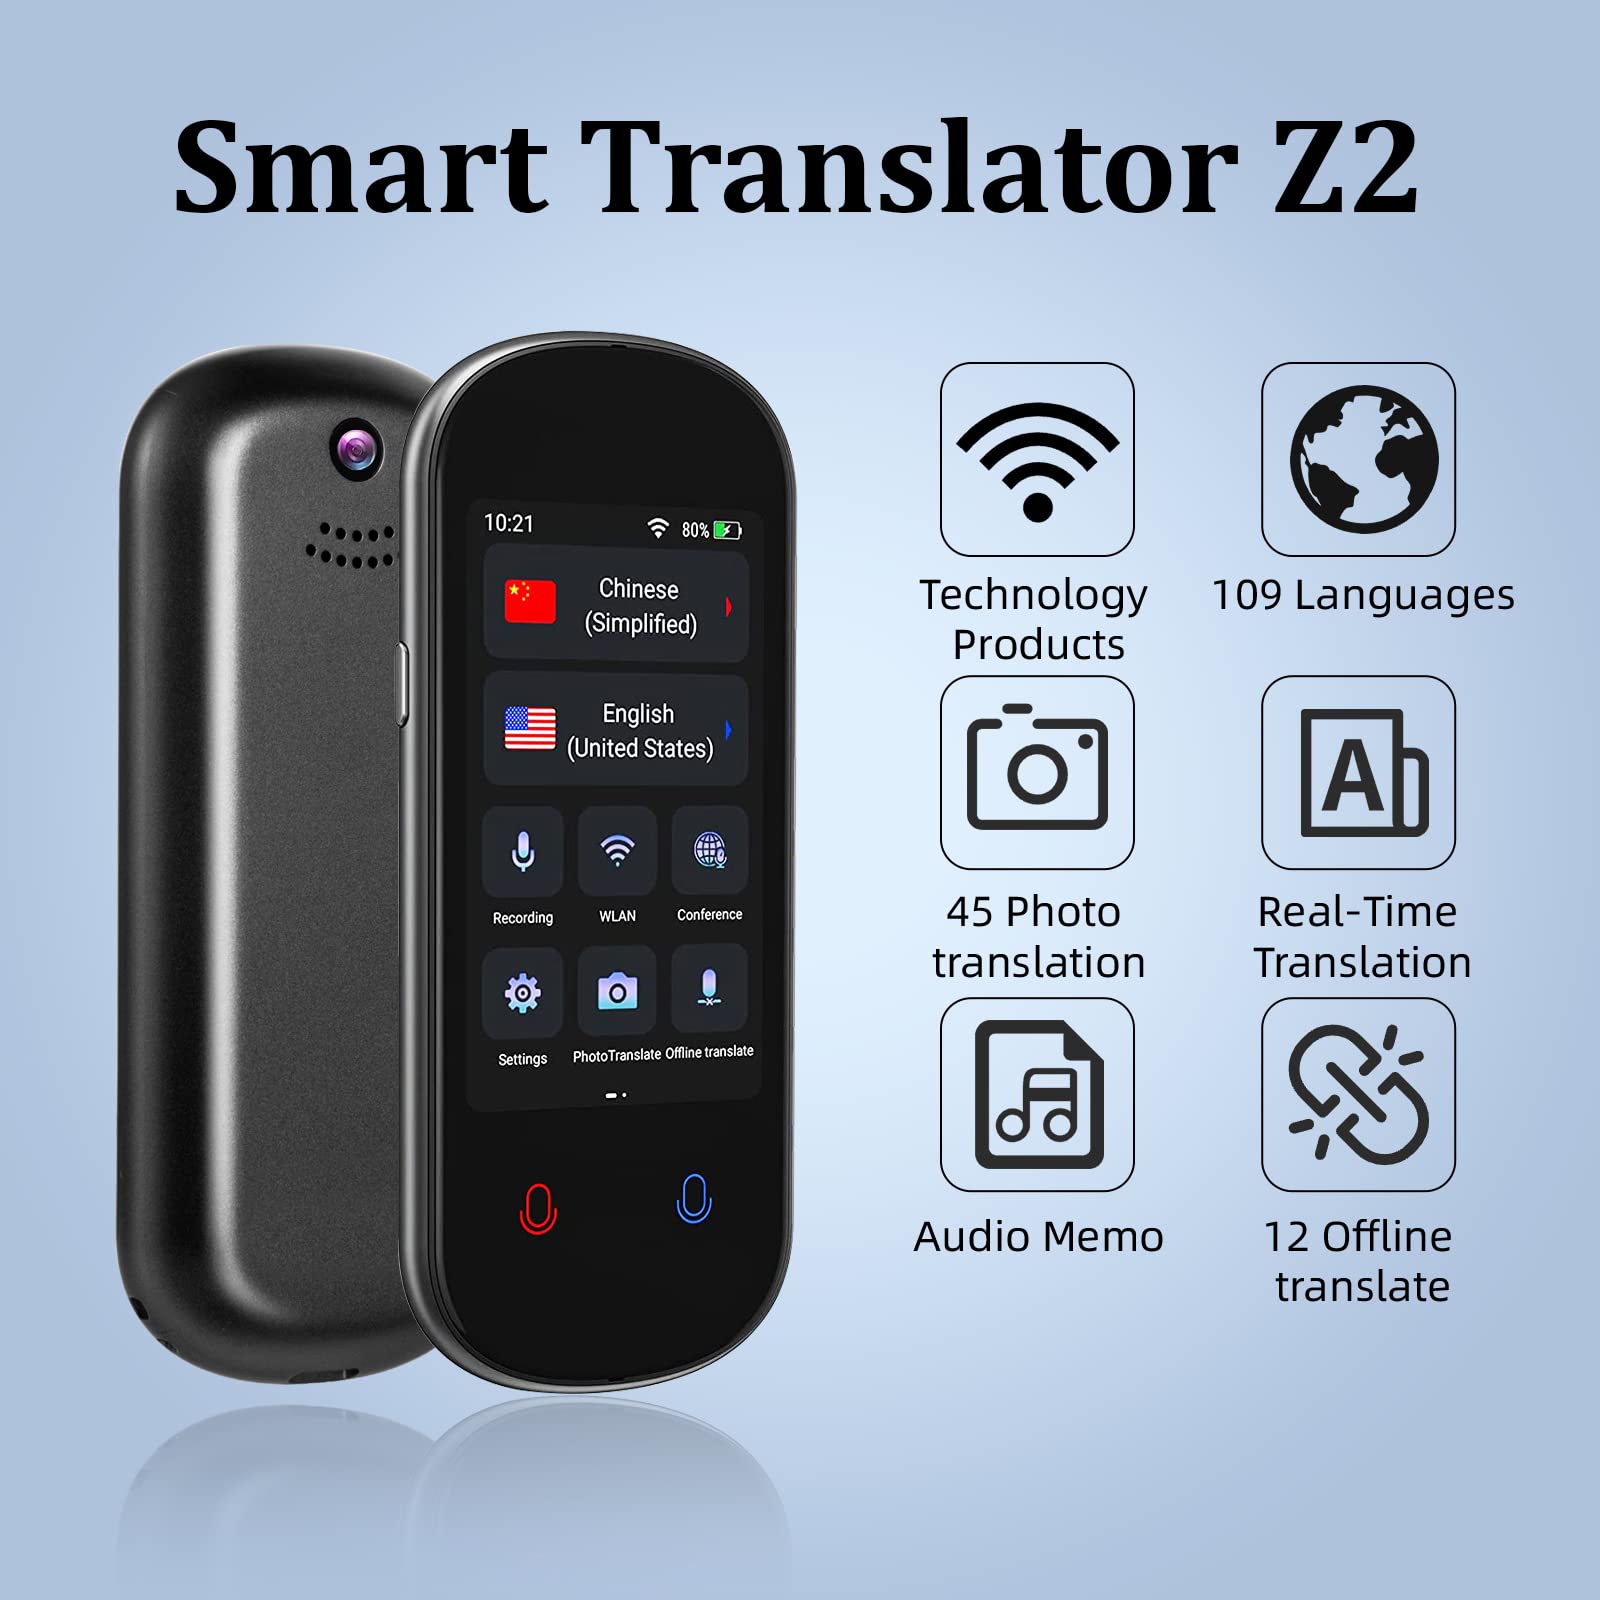 Instant Language Translator Device, Two-Way Smart Voice and Photo Pocket Translator Real Time, 109 Languages Supported, Standy 180H, Portable Offline Translation for Business, Learning & Travel